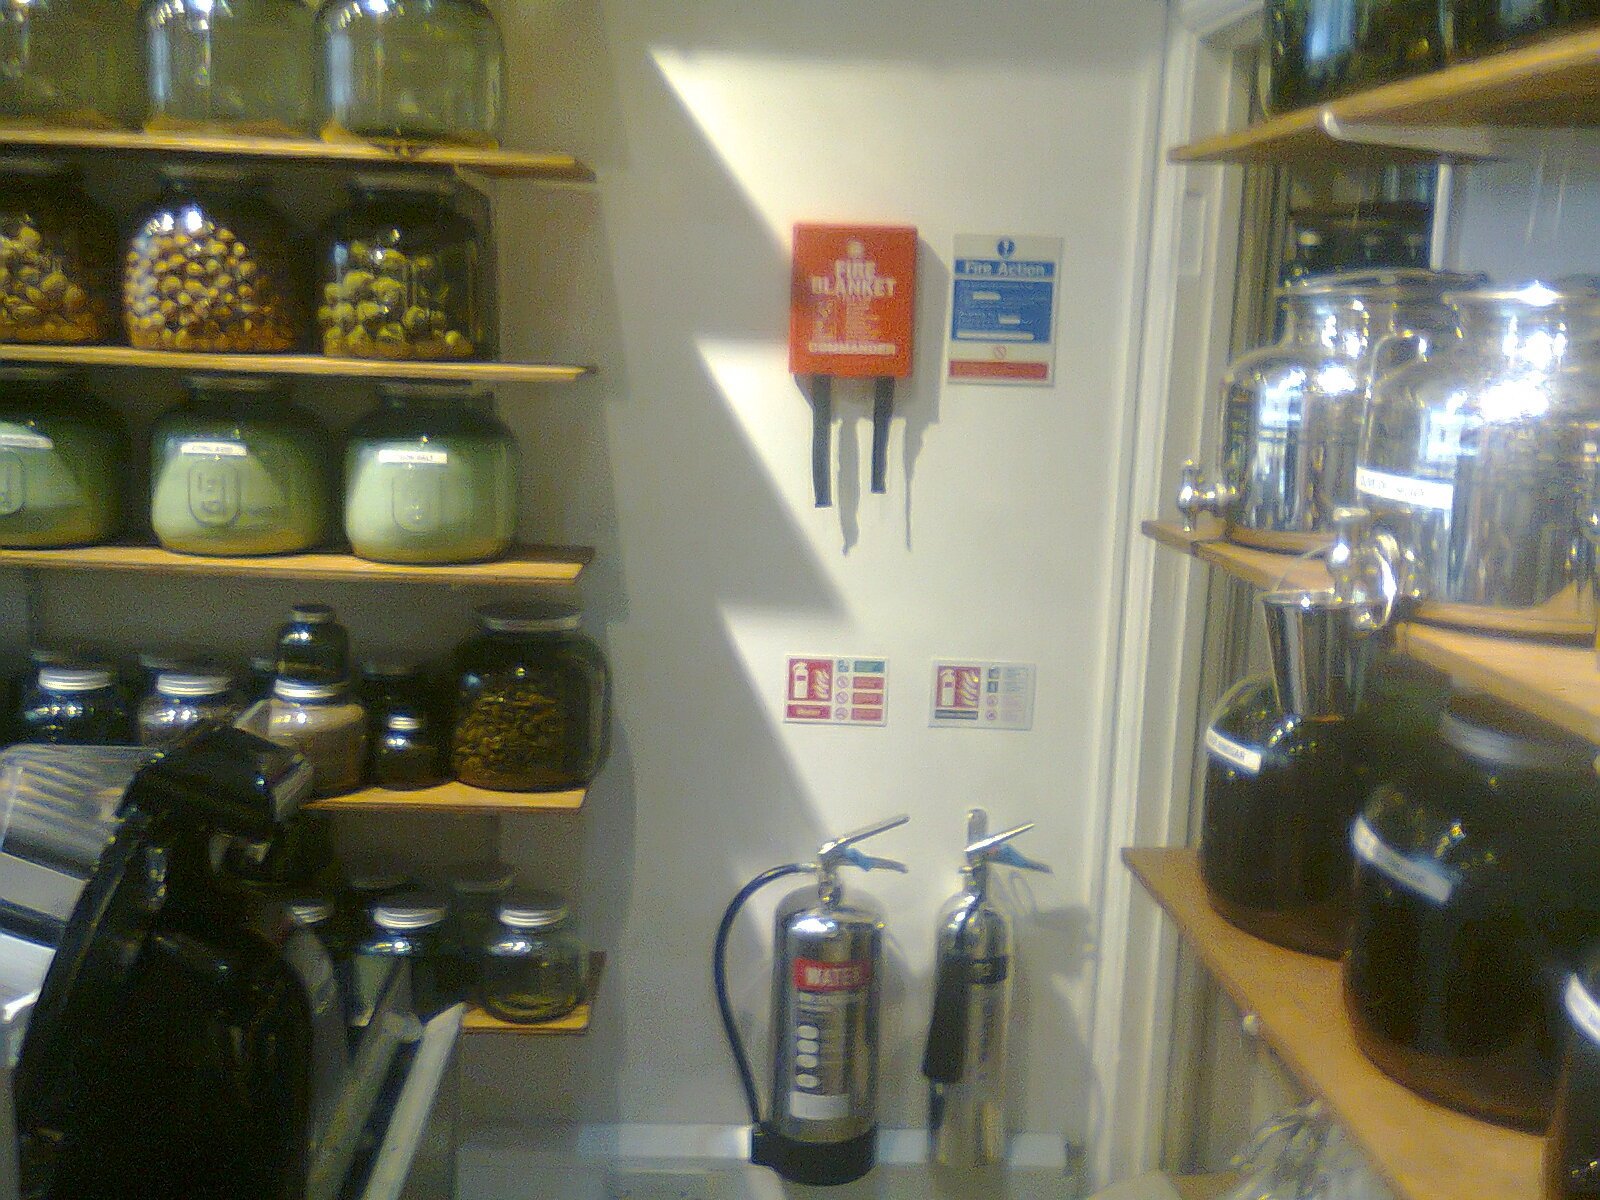 Fire Extinguisher Spare Parts Added + Fire Certificate to meet BS 5306-3: 2017 - Reading, Berkshire